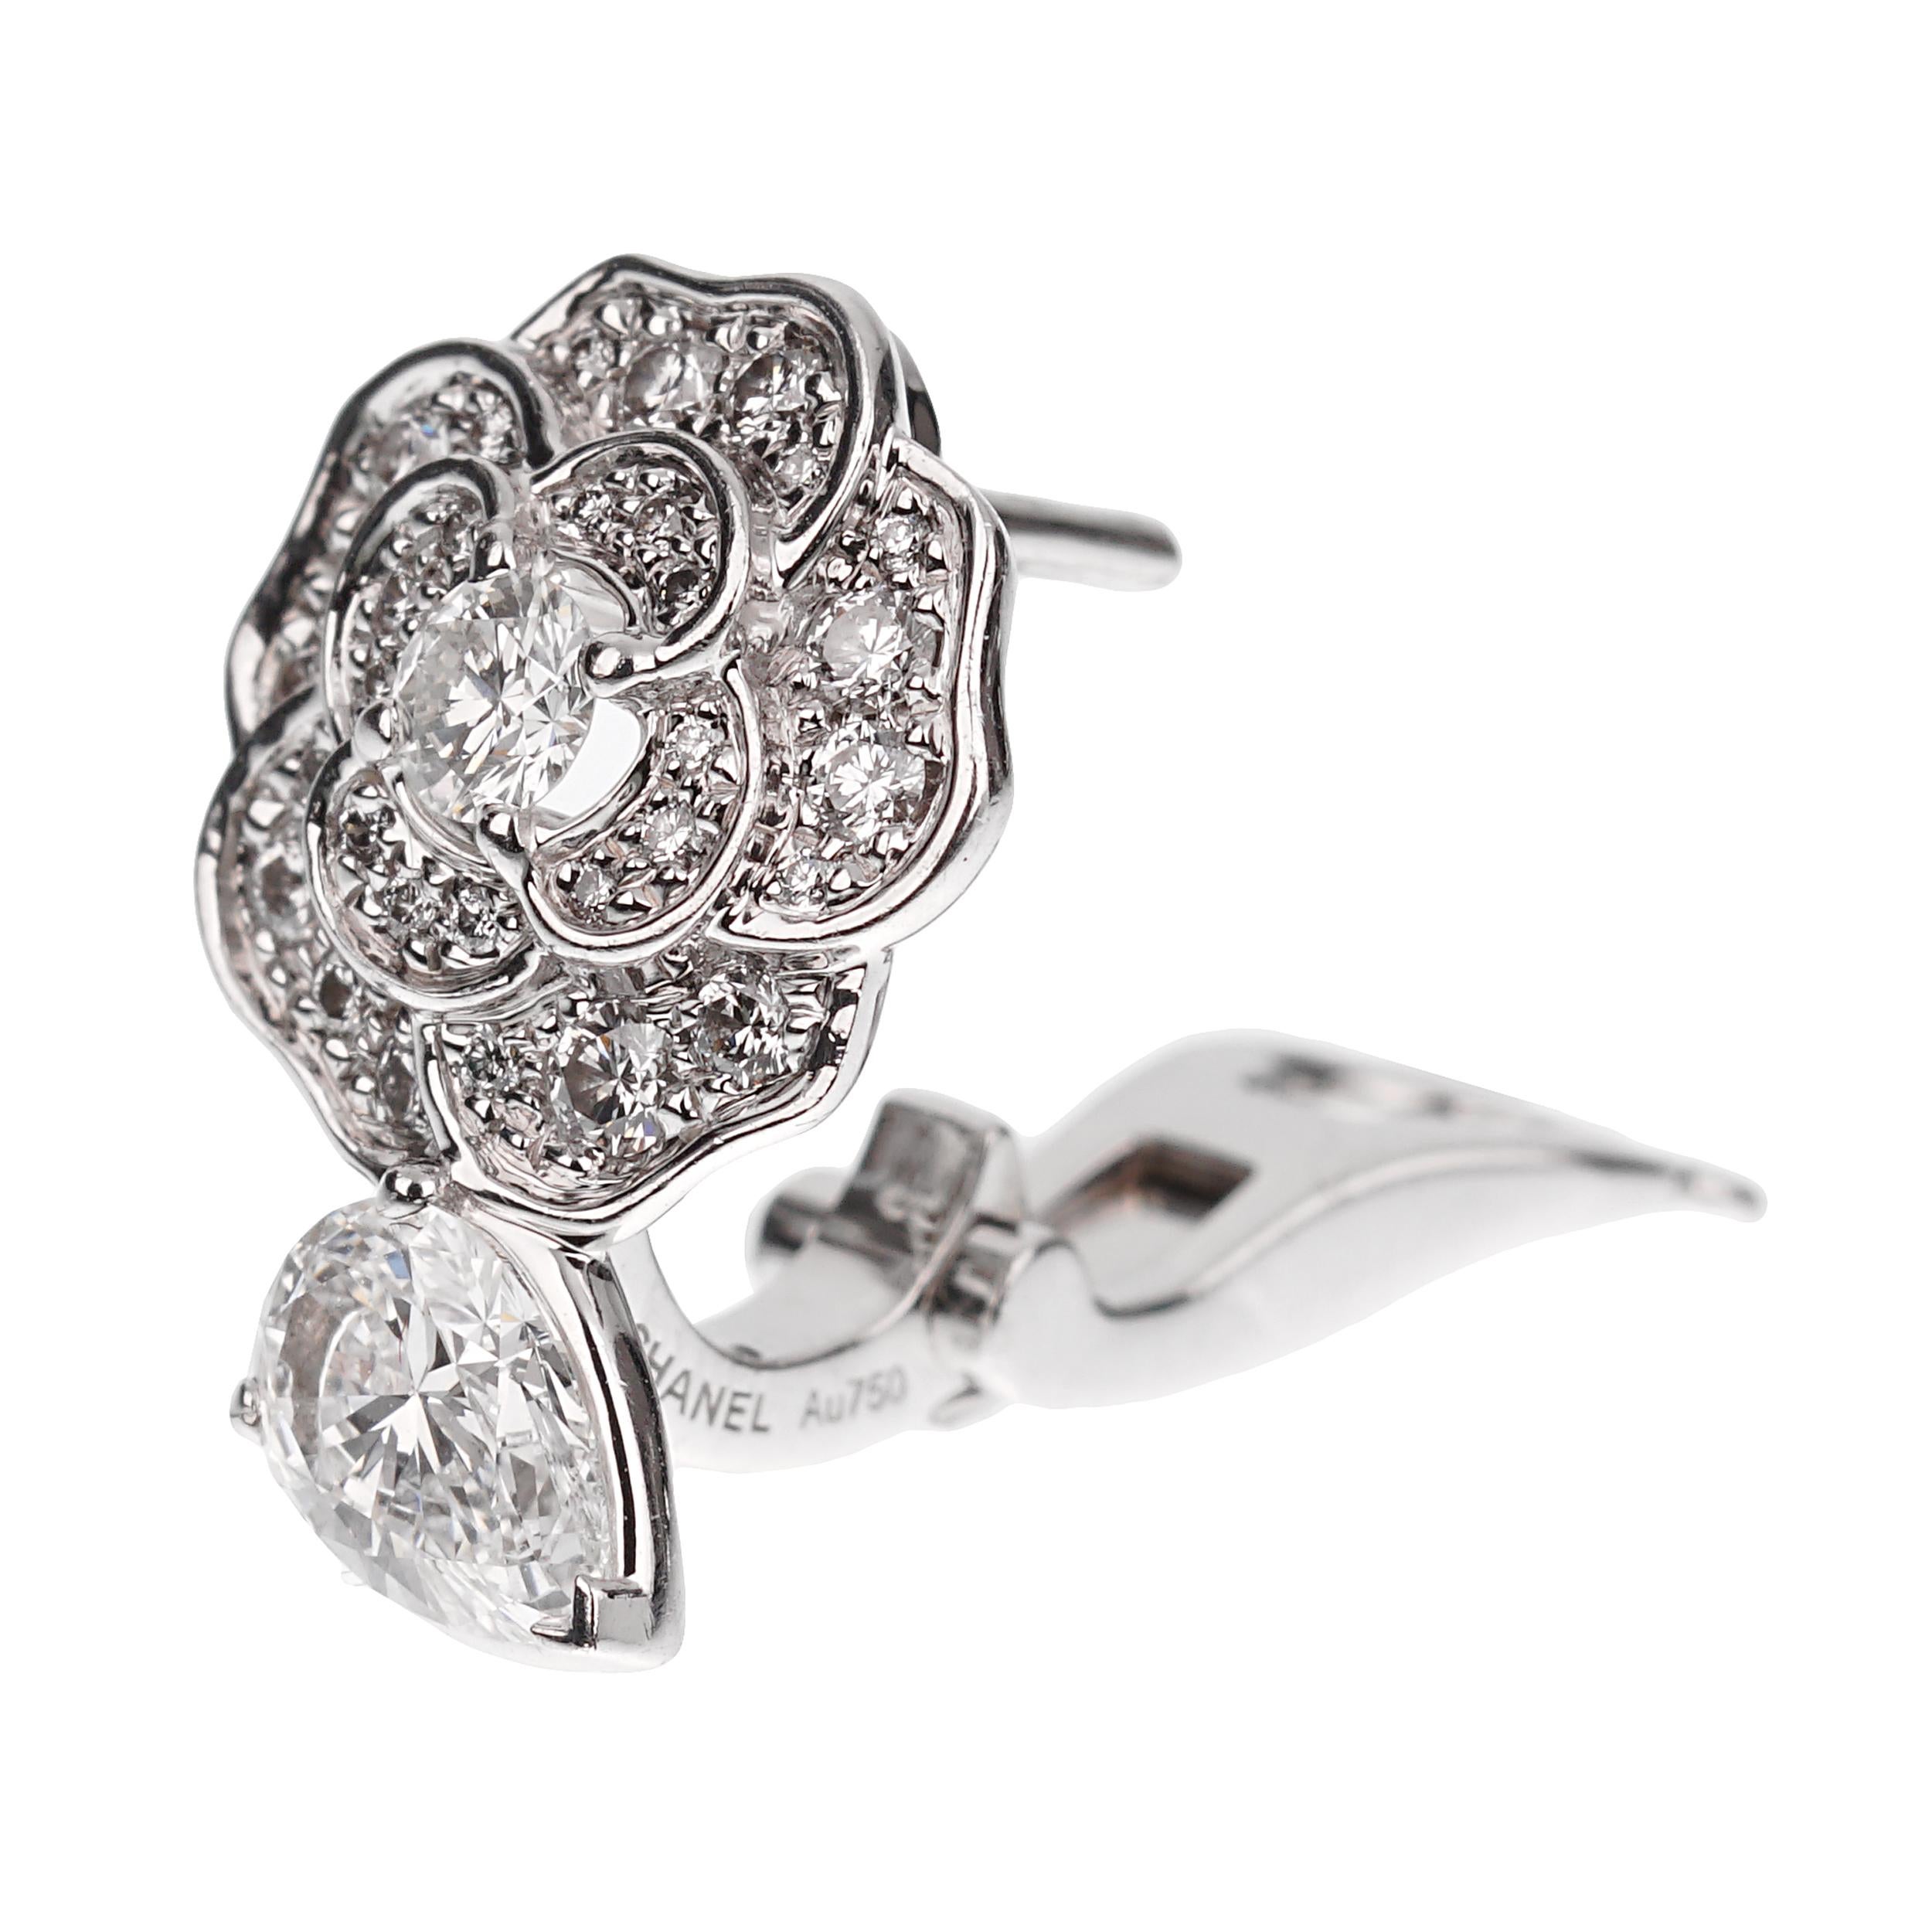 Mixed Cut Chanel Camelia Precieux Diamond White Gold Earrings For Sale